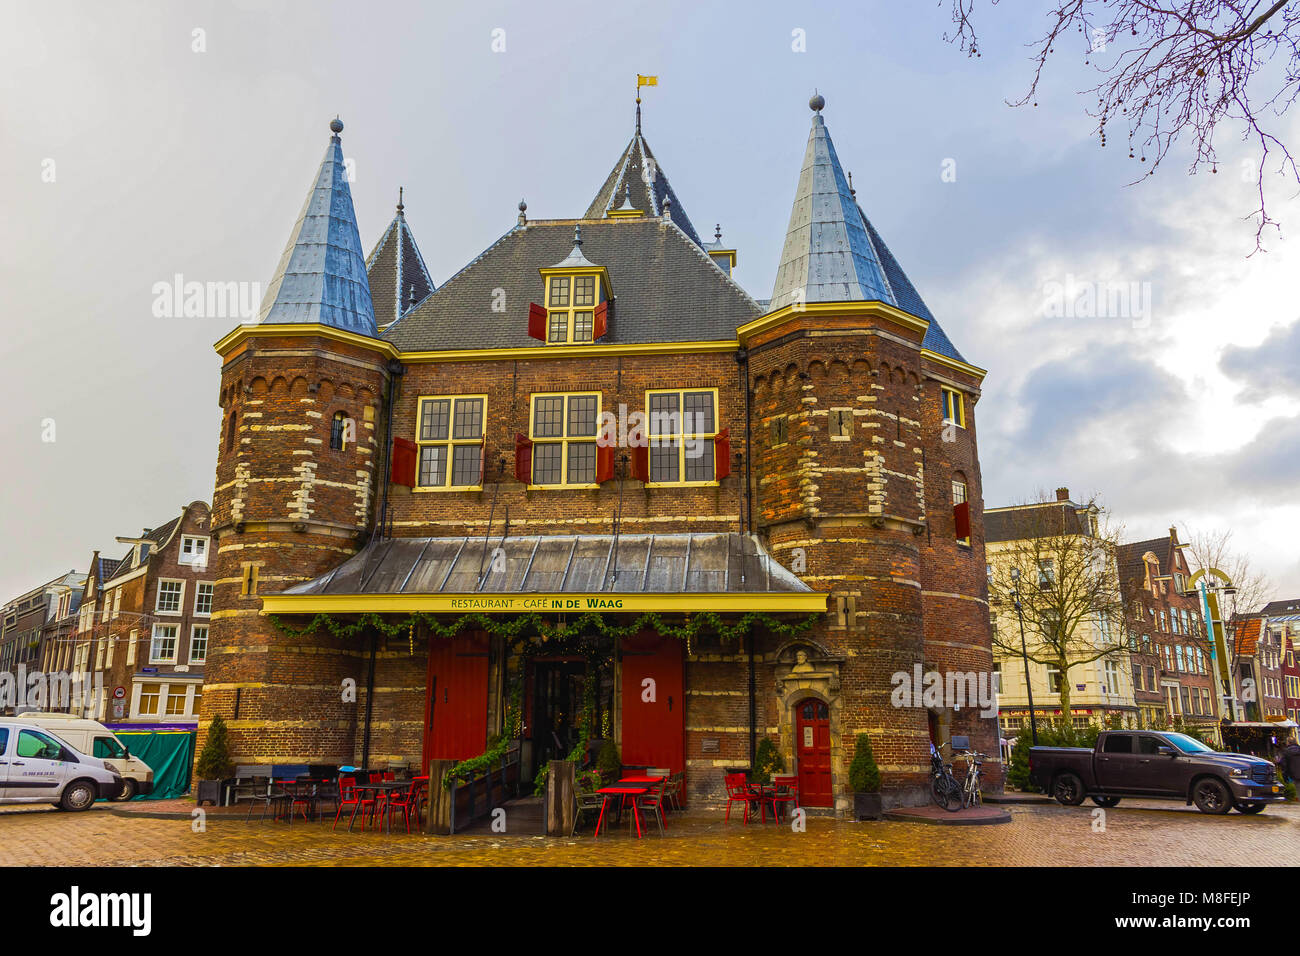 Amsterdam, Netherlands - December 14, 2017: Weigh house or Waag at Nieuwmarkt or New market square in Amsterdam Stock Photo